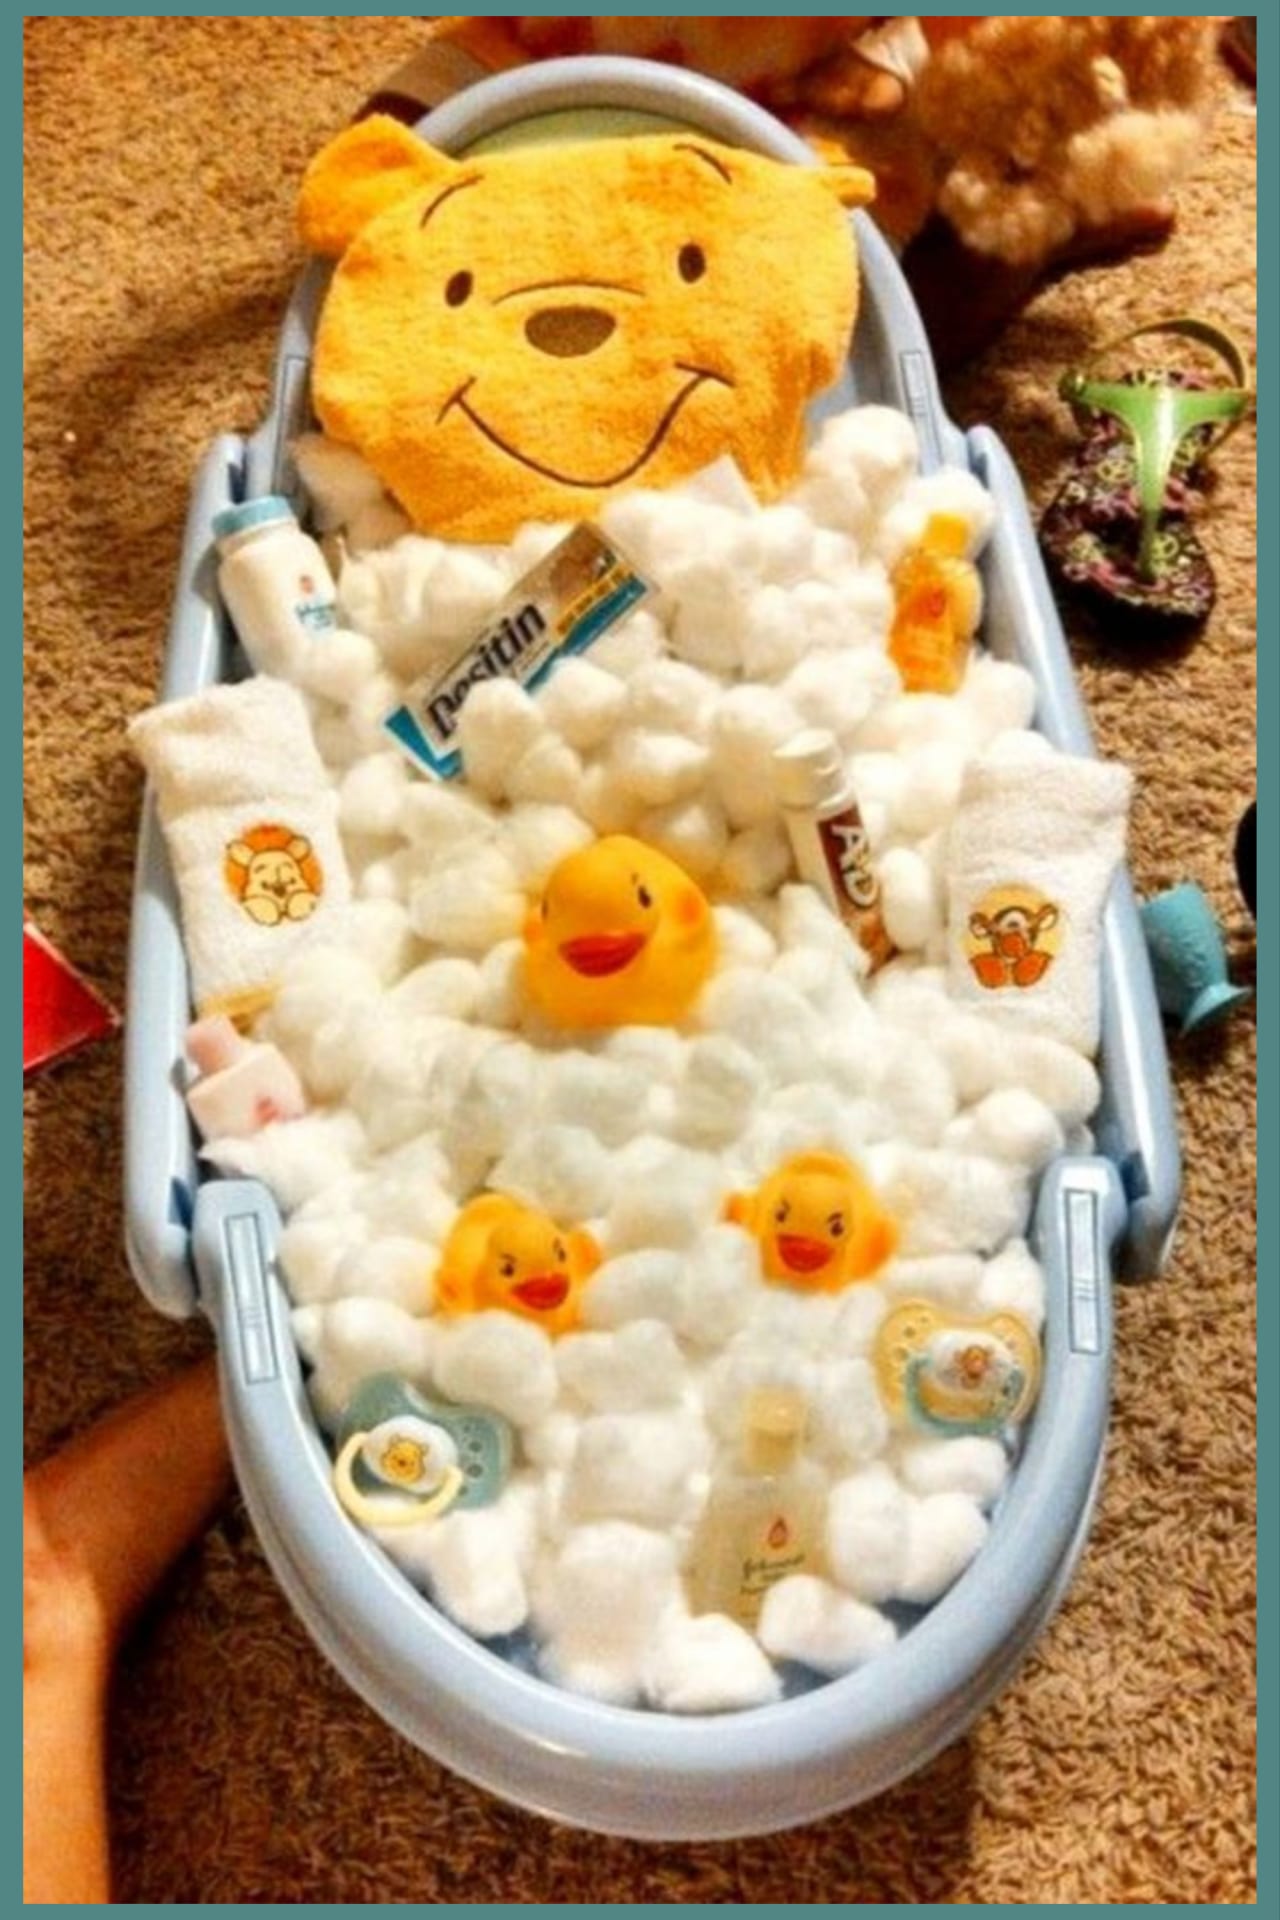 DIY baby shower gifts! Homemade Baby Bathtub Gift Basket shower gift ideas - Baby shower gift ideas on a budget - unique and cheap baby shower gifts to make for girls for boys or for gender unknown (gender neutral) - creative baby basket ideas and winnie the pooh baby shower ideas 